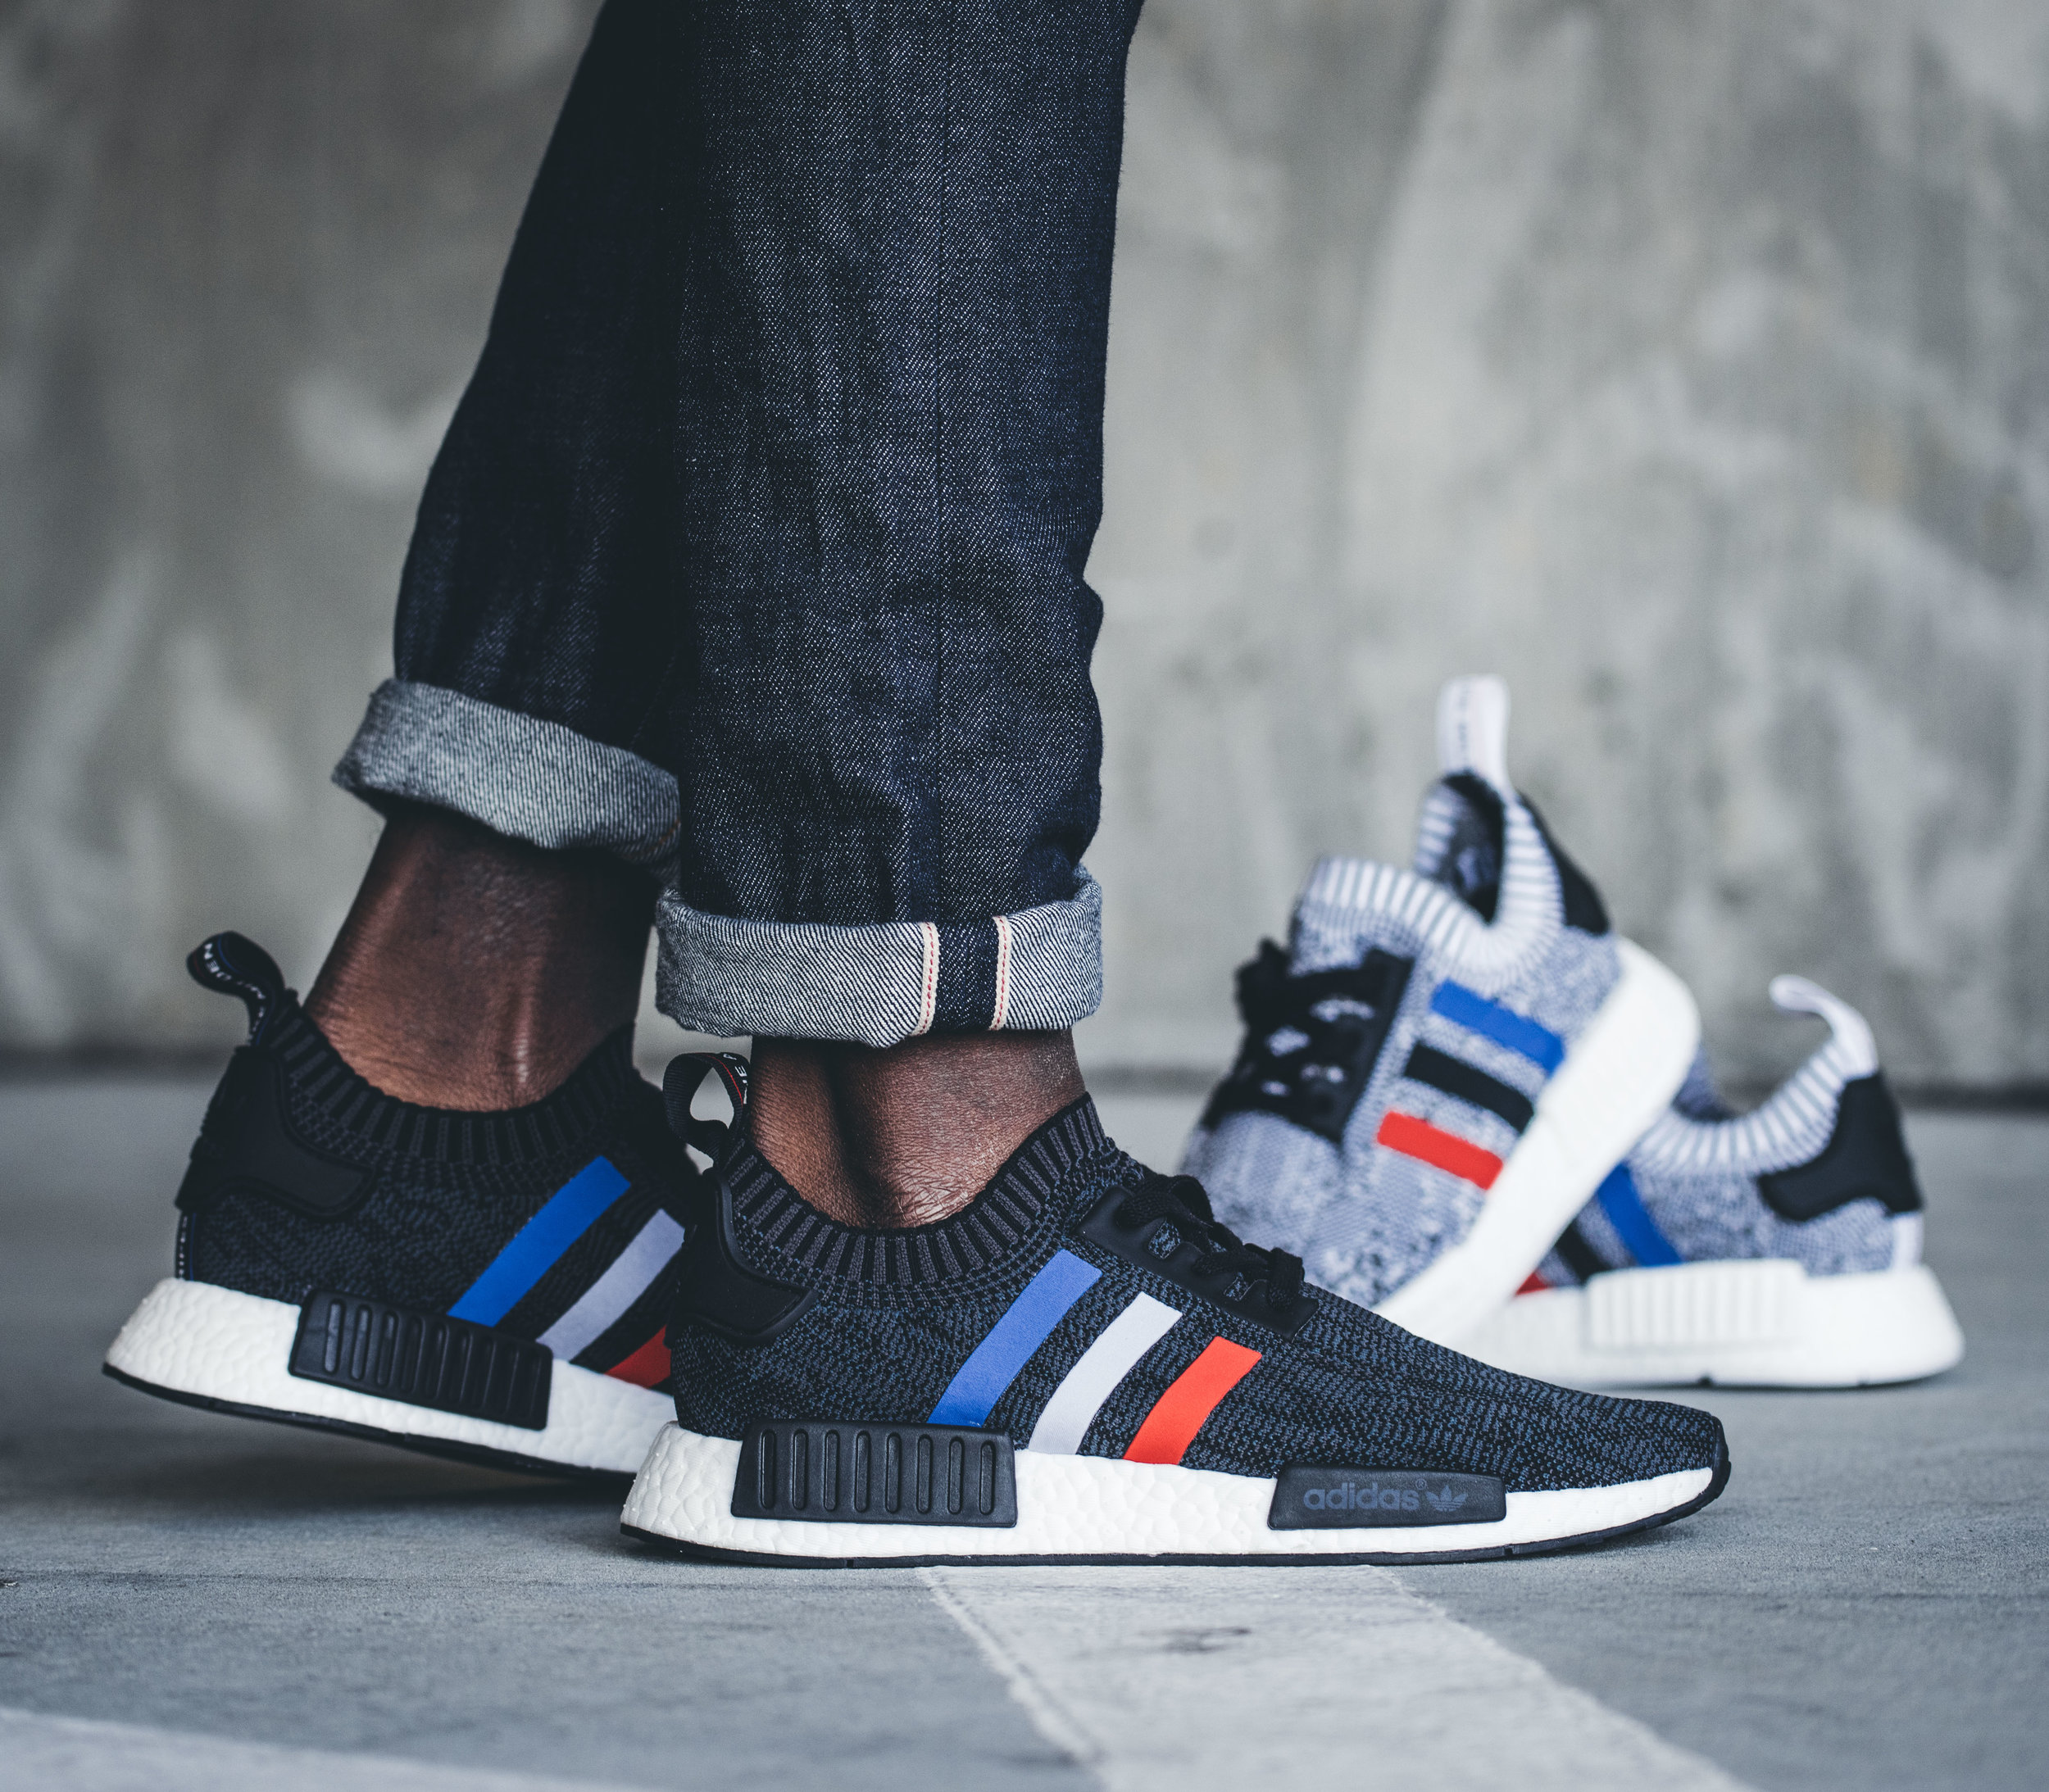 Now Adidas R1 "Tri-Color Pack" — Epitome